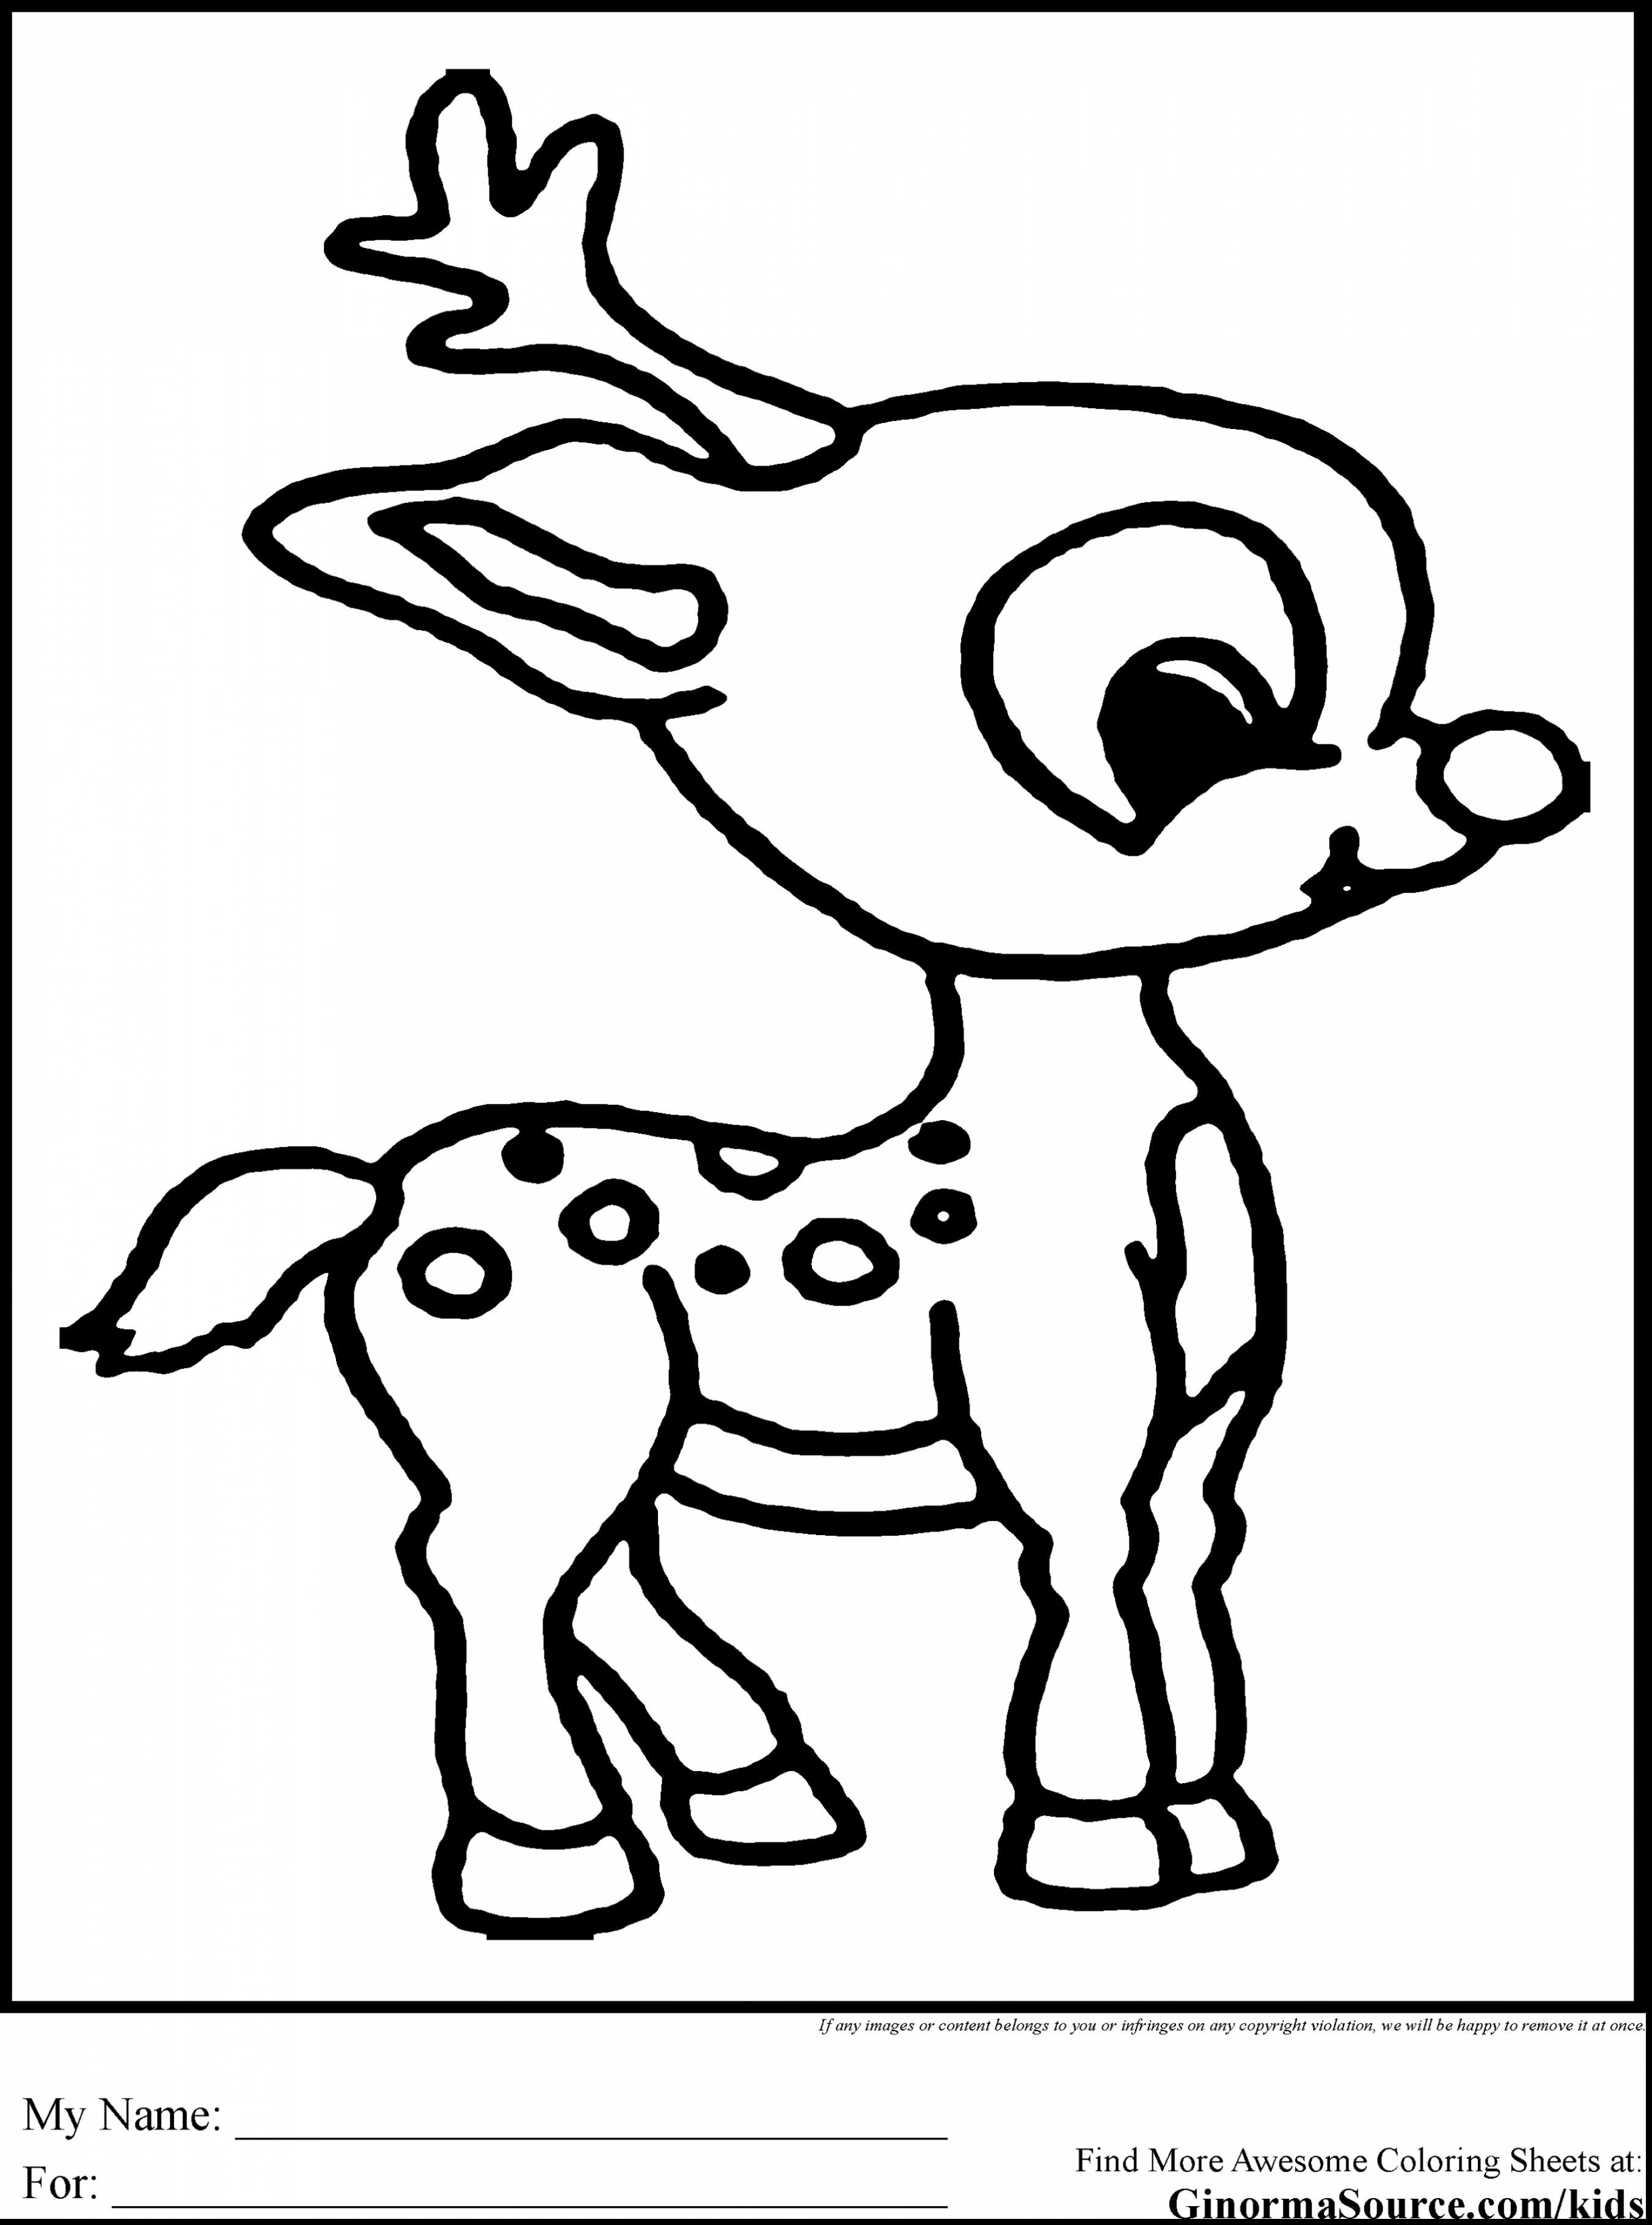 Reindeer Face Coloring Pages at GetColorings.com | Free printable